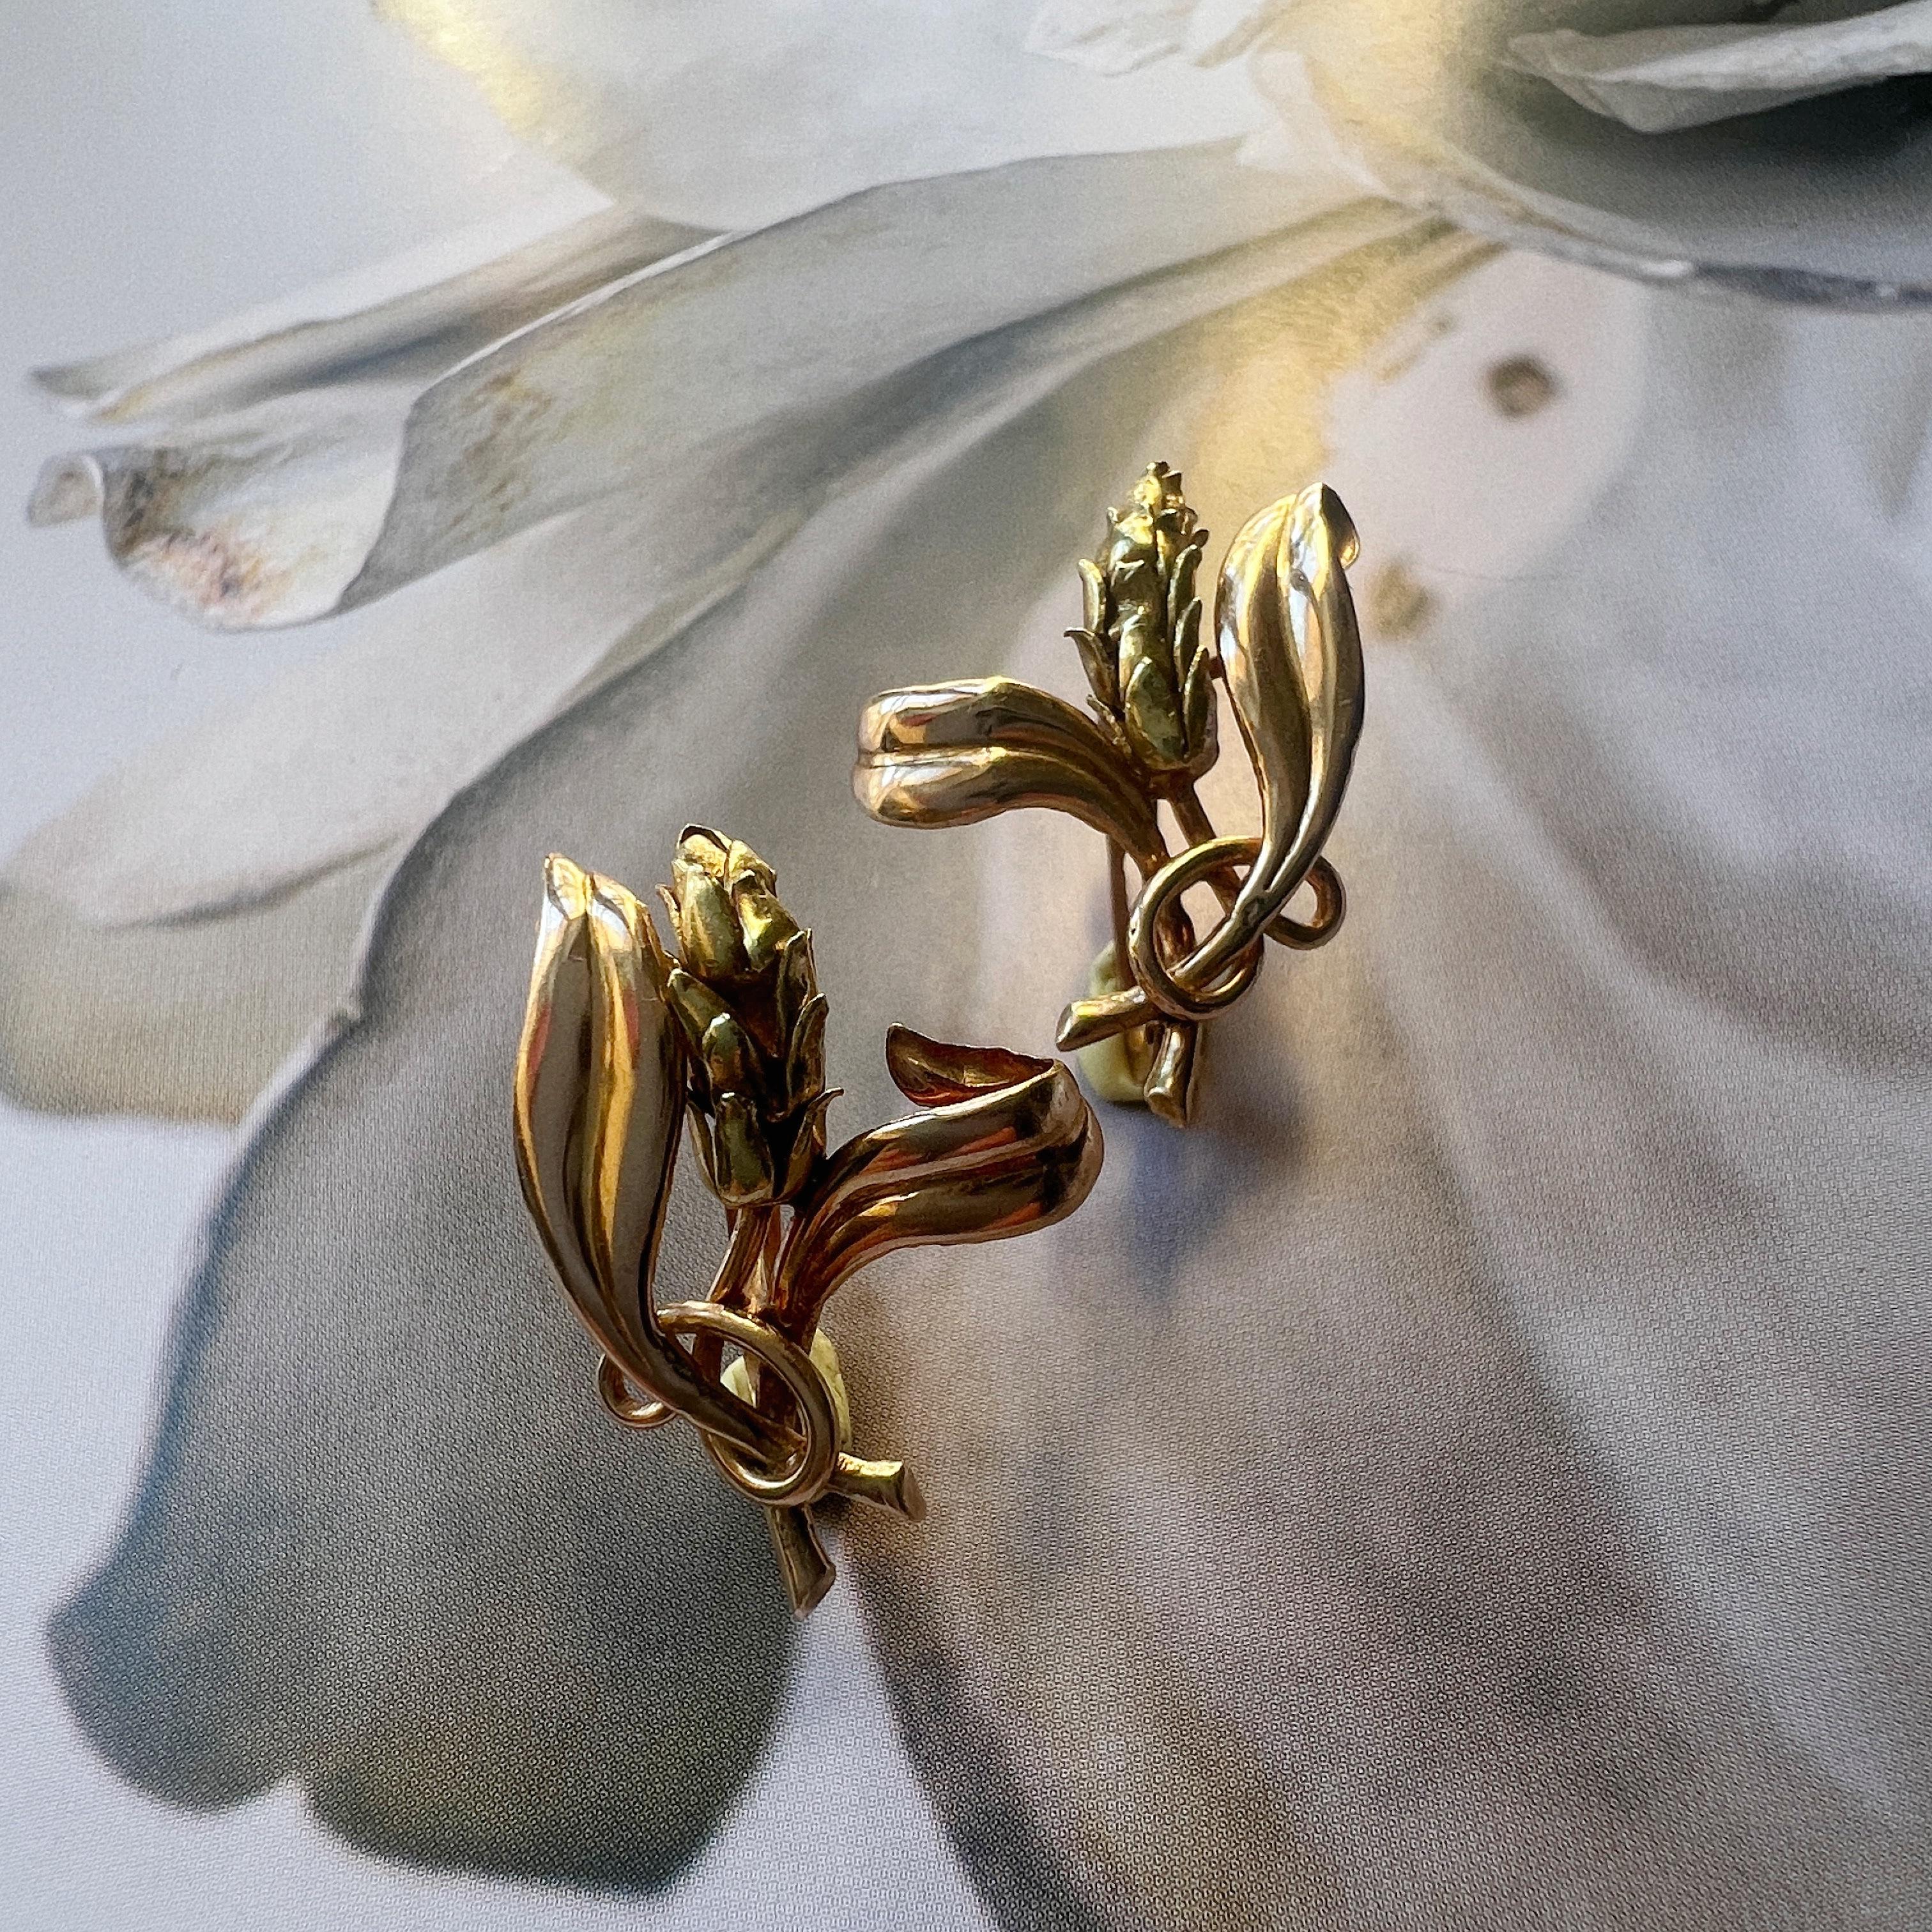 For sale a beautiful pair of 18K gold wheat ears earrings. Each earring features a meticulous wheat, complete with their leaves on either side. The 18K gold is skillfully crafted to imitate the organic form of the wheat, with a keen emphasis on